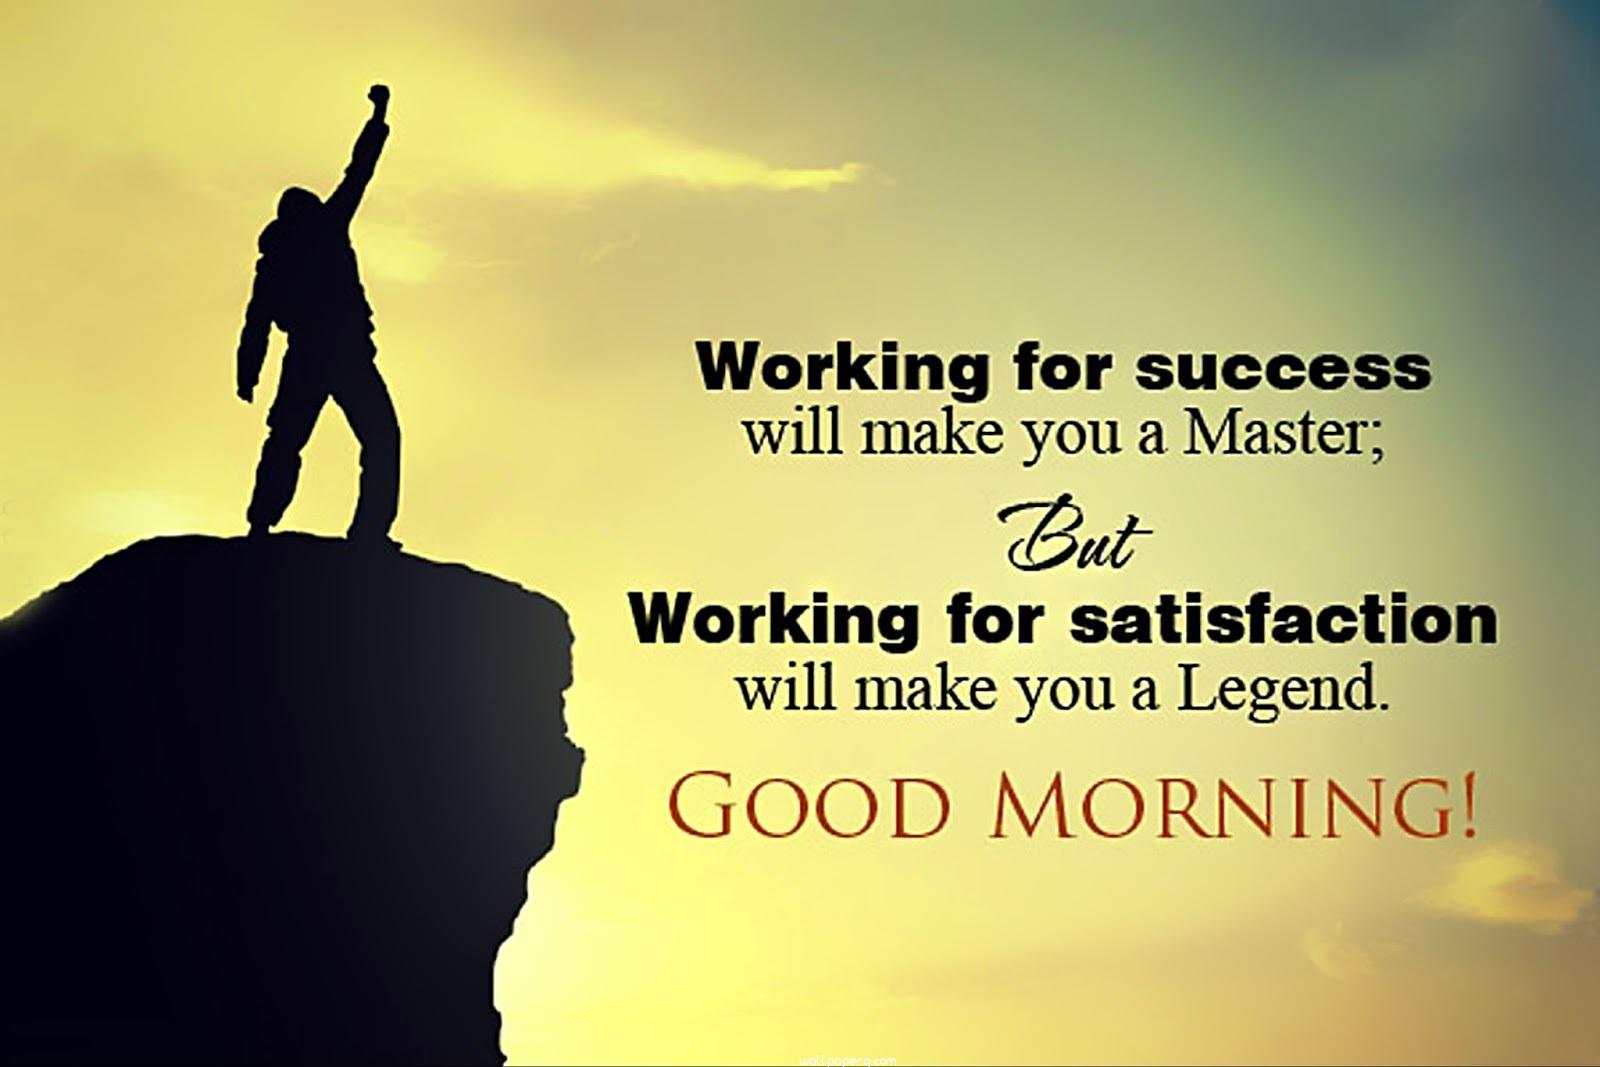 Good Morning Images With Quotes Hd - Legand Good Morning Quotes ...